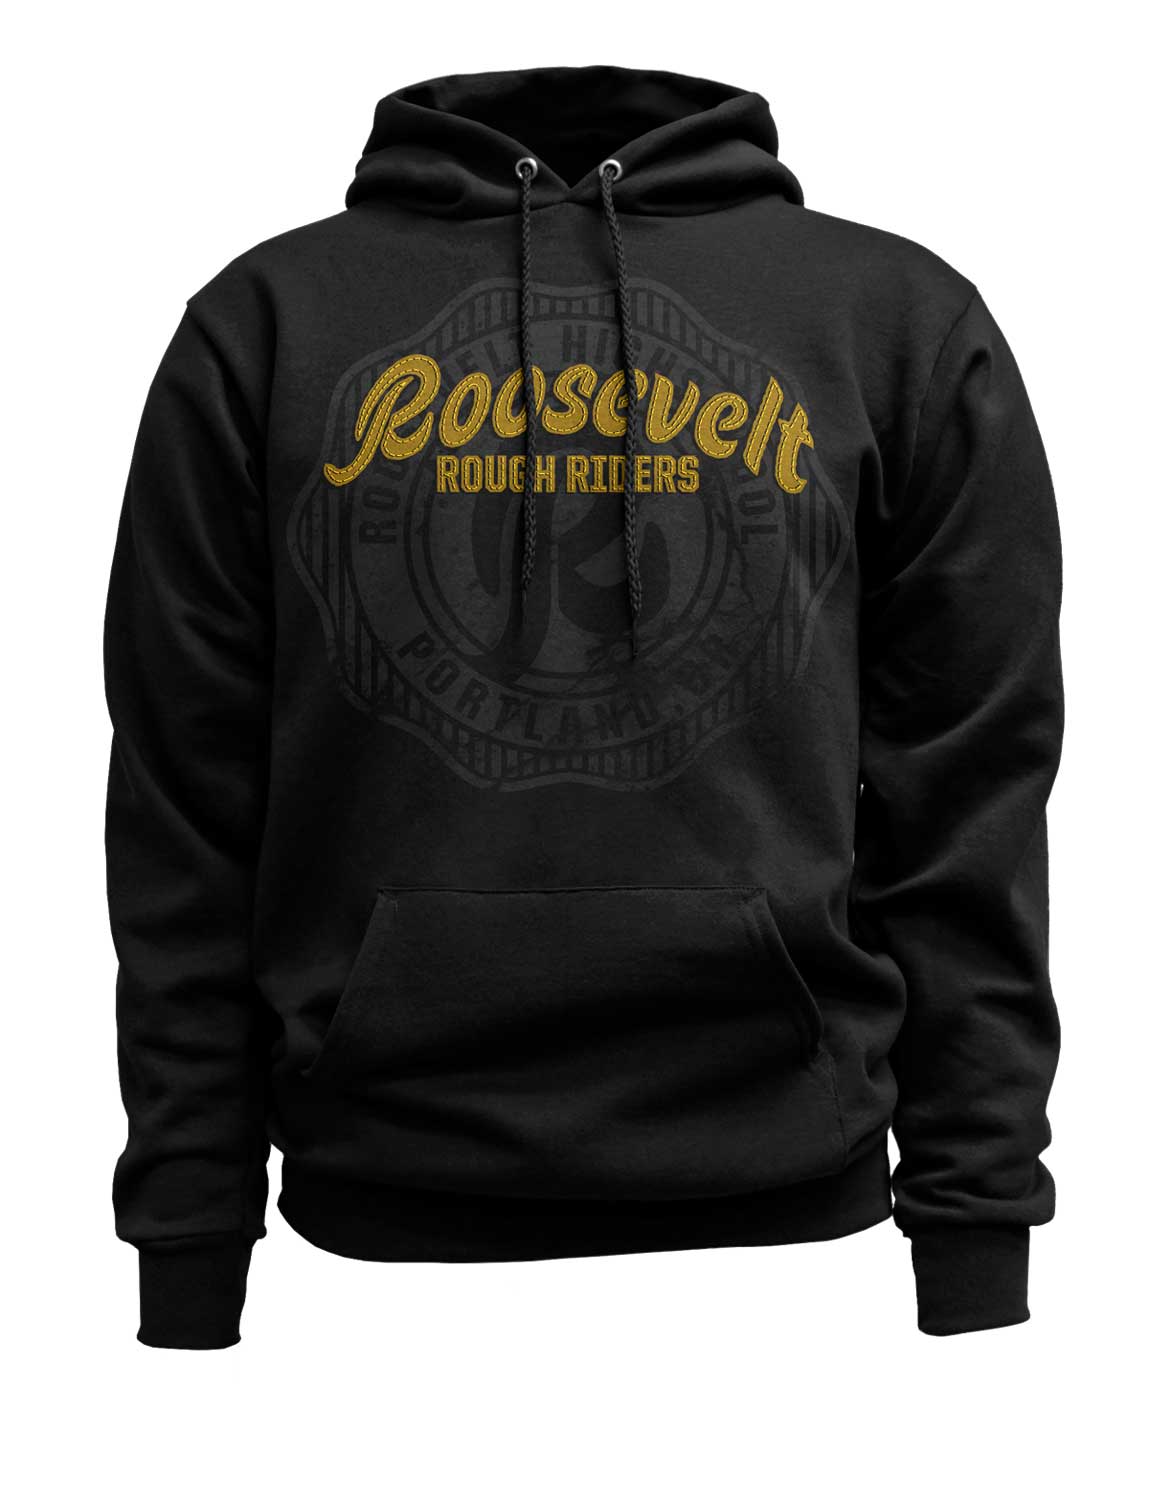 Custom printed hoodie with yellow "Roosevelt" logo in center.